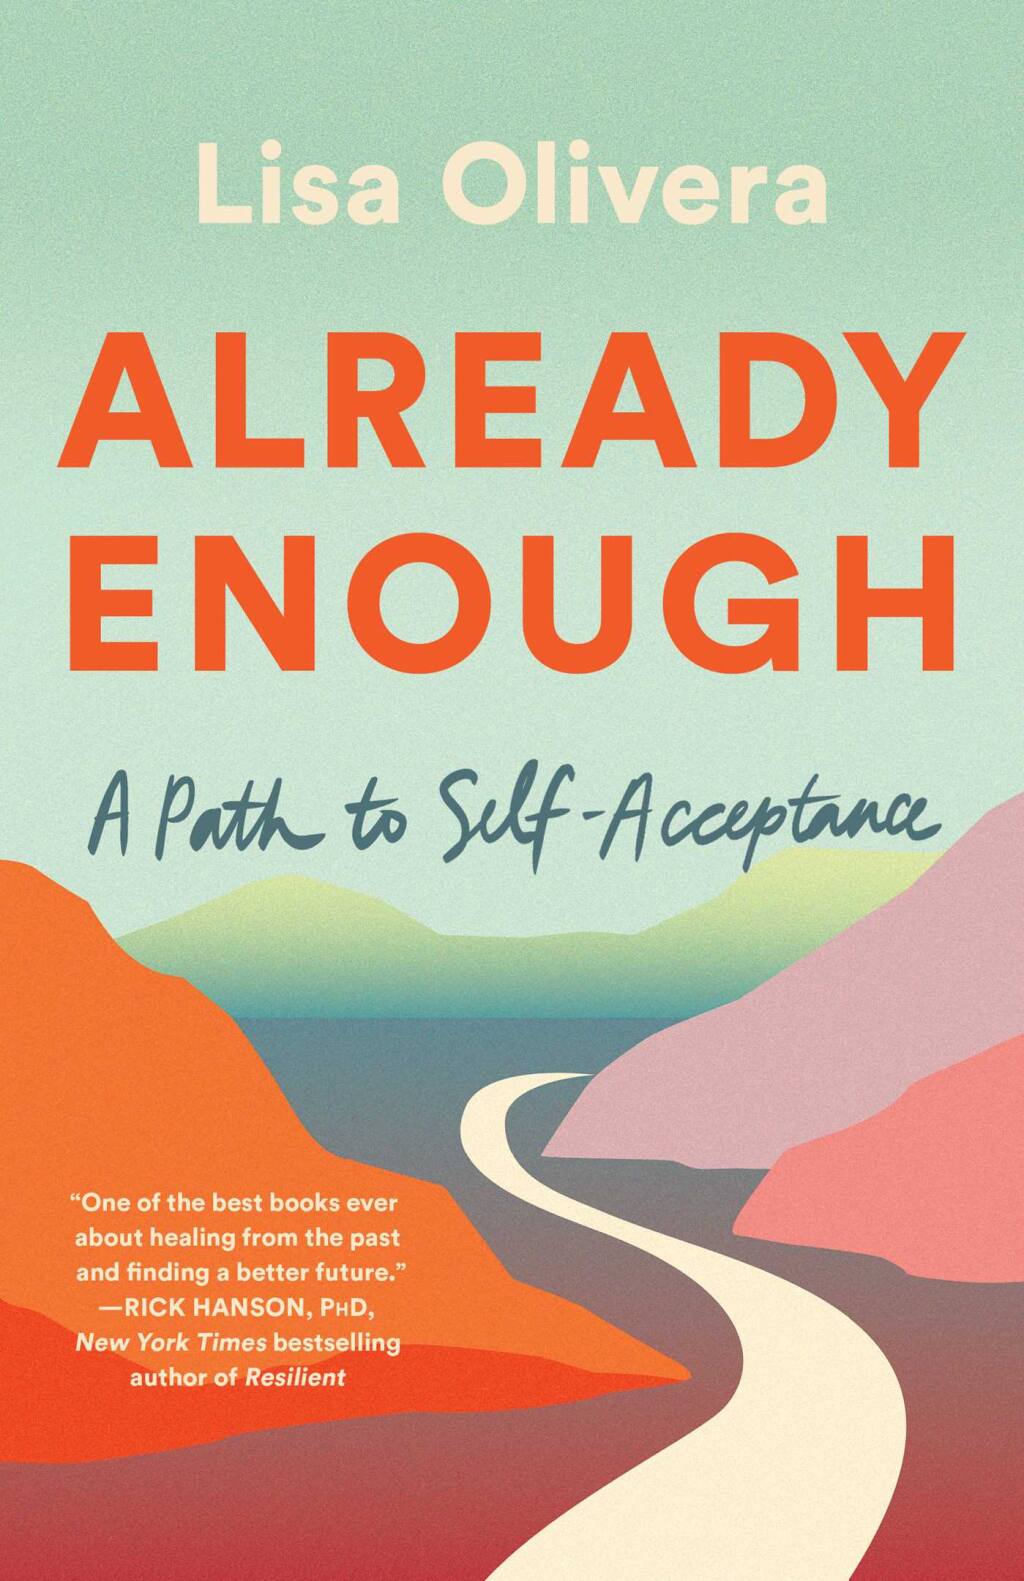 Lisa Olivera’s “Already Enough” is the No. 1 bestselling book in Petaluma this week. (SIMON & SCHUSTER)